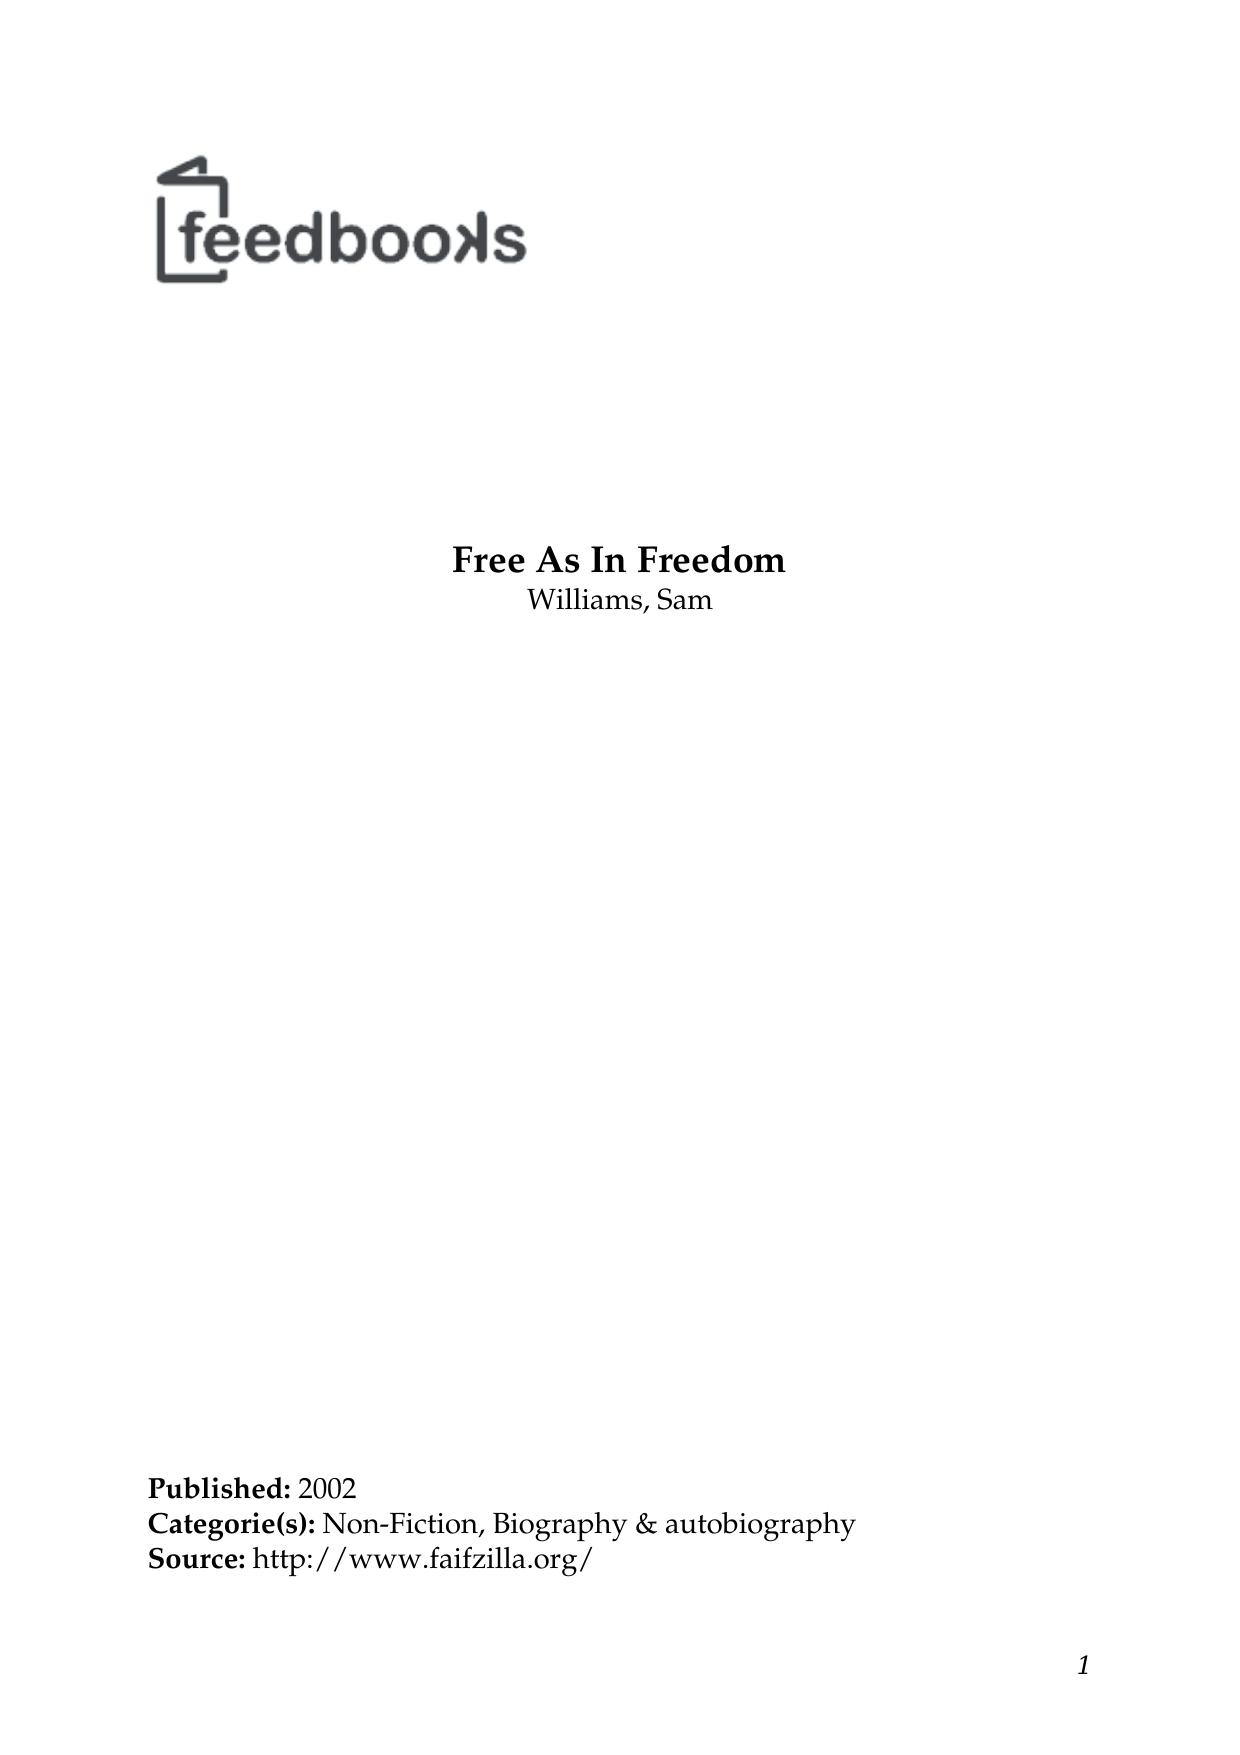 Free As In Freedom by Williams Sam